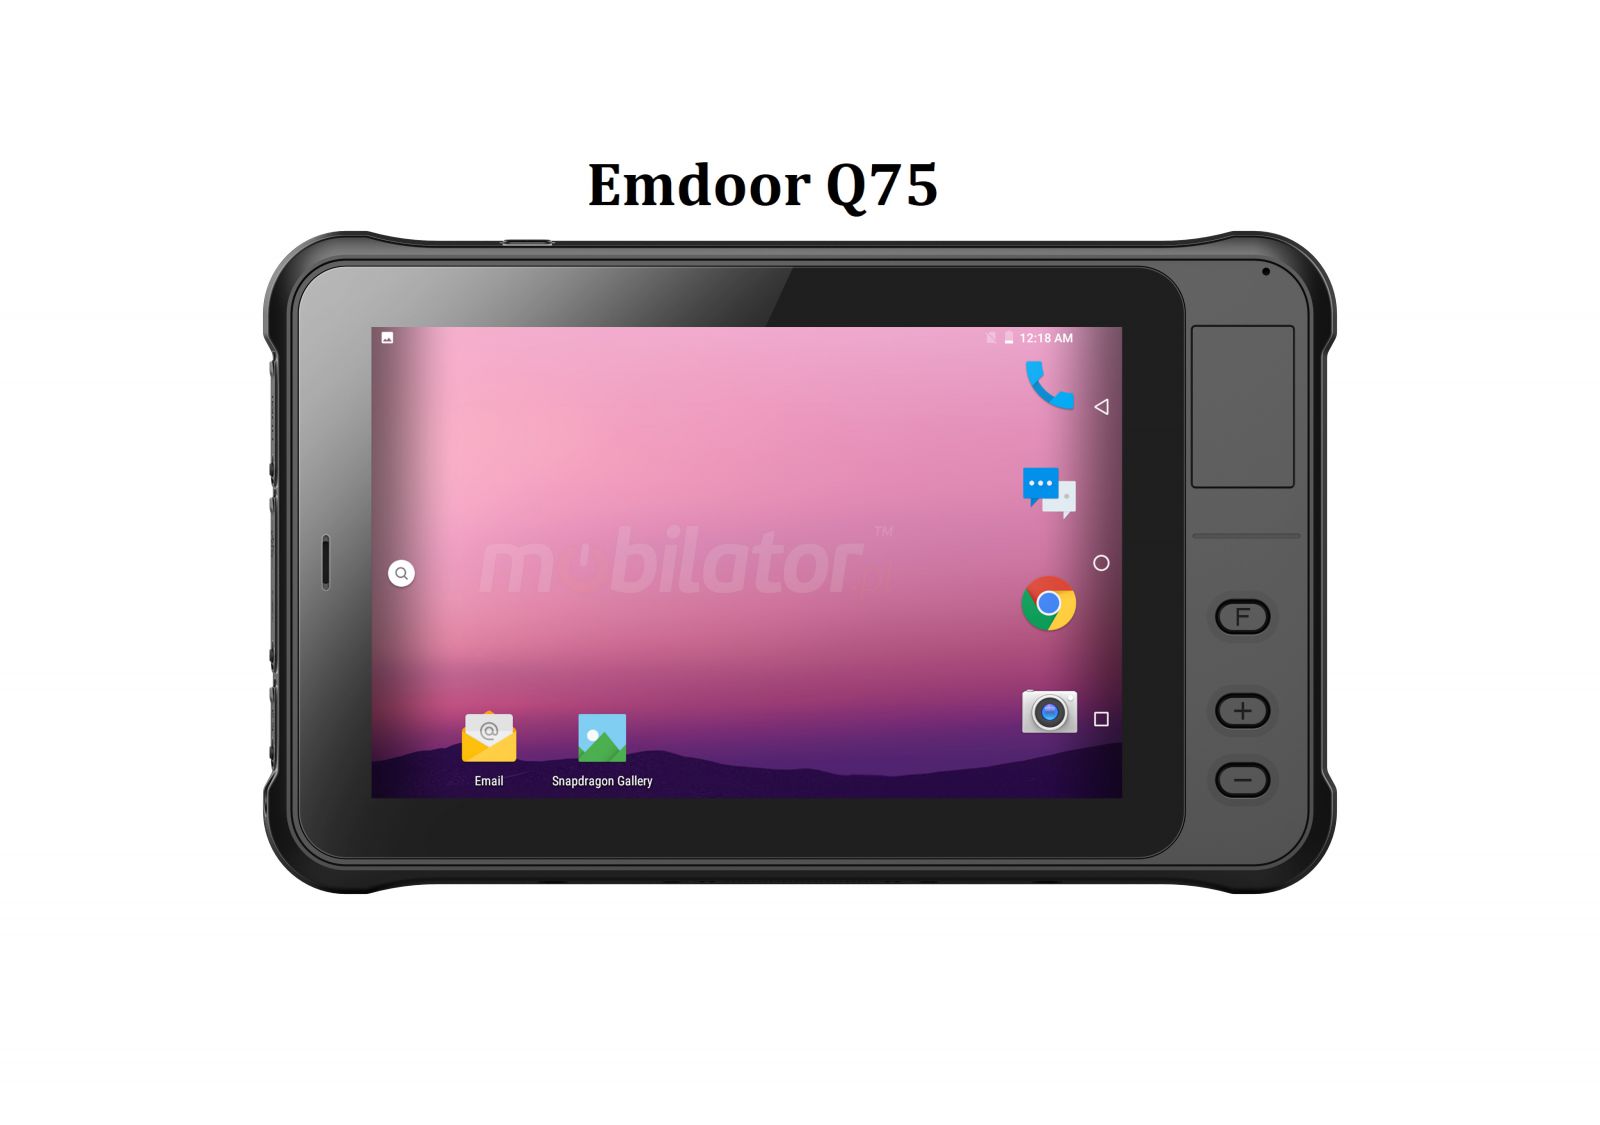 Rugged tablet with a 7 inch IPS screen, Android 10.0 GMS, 4GB RAM, 64GB disk, NFC, 1D code scanner - Emdoor Q75 v.2 